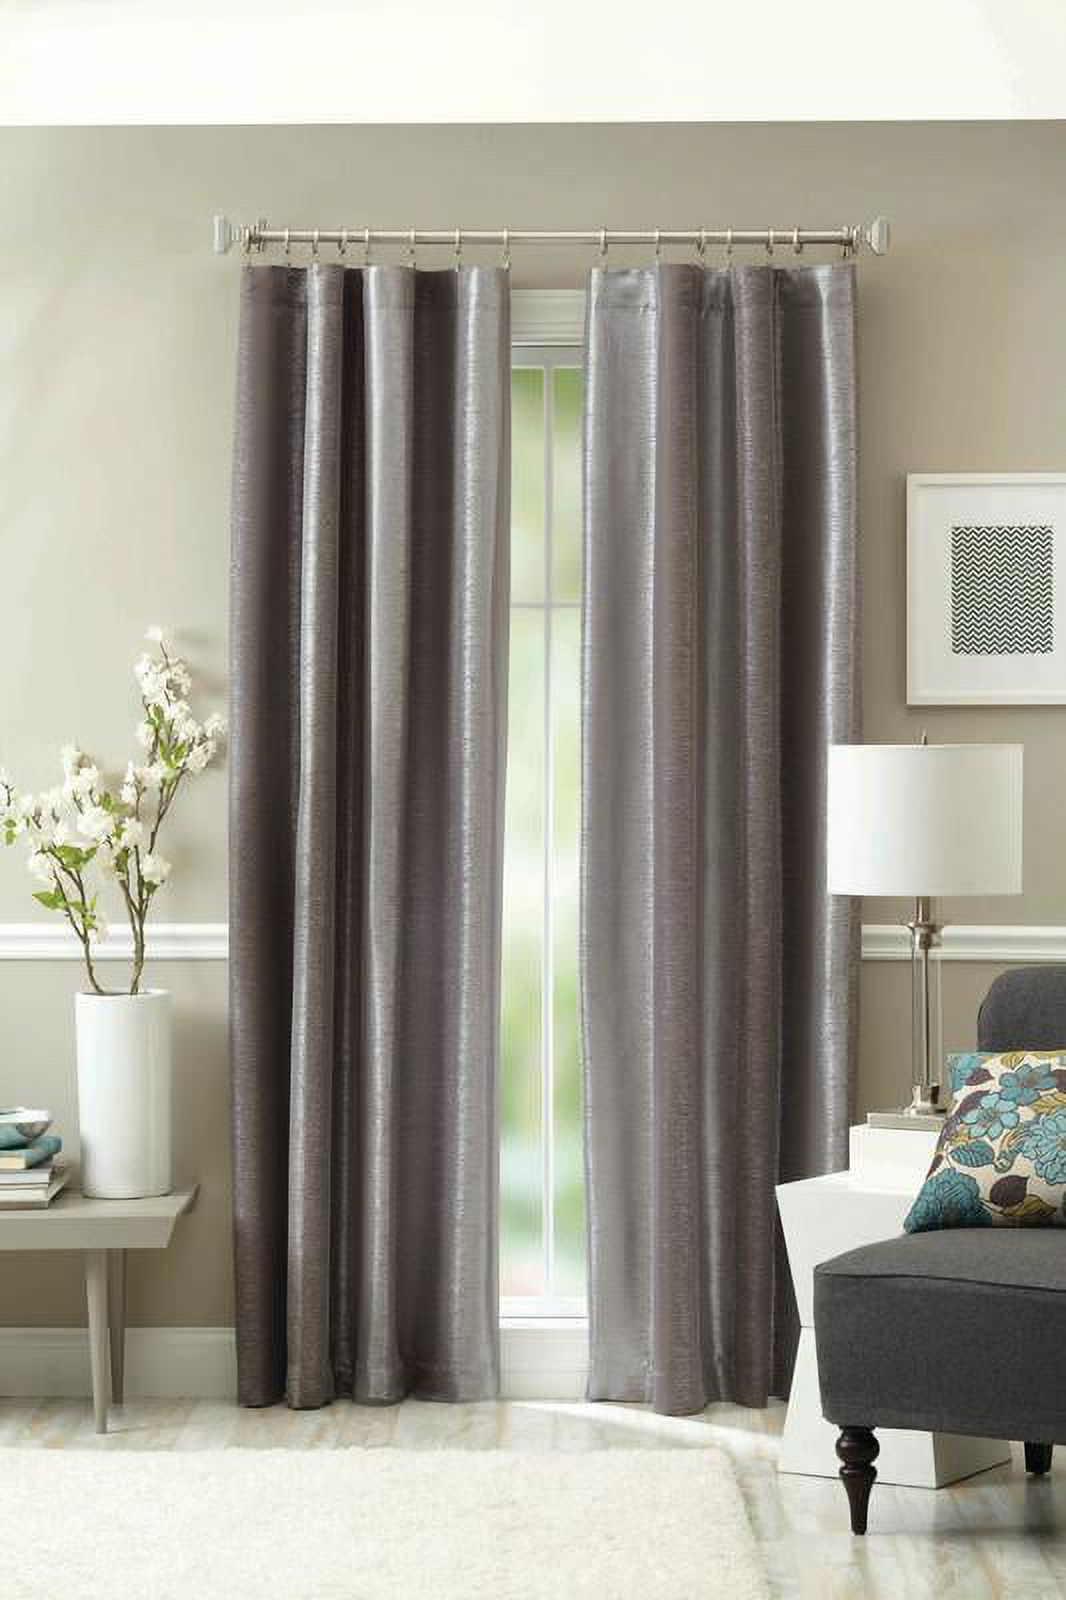 Better Homes and Gardens Graphite Curtain Panel - image 1 of 1